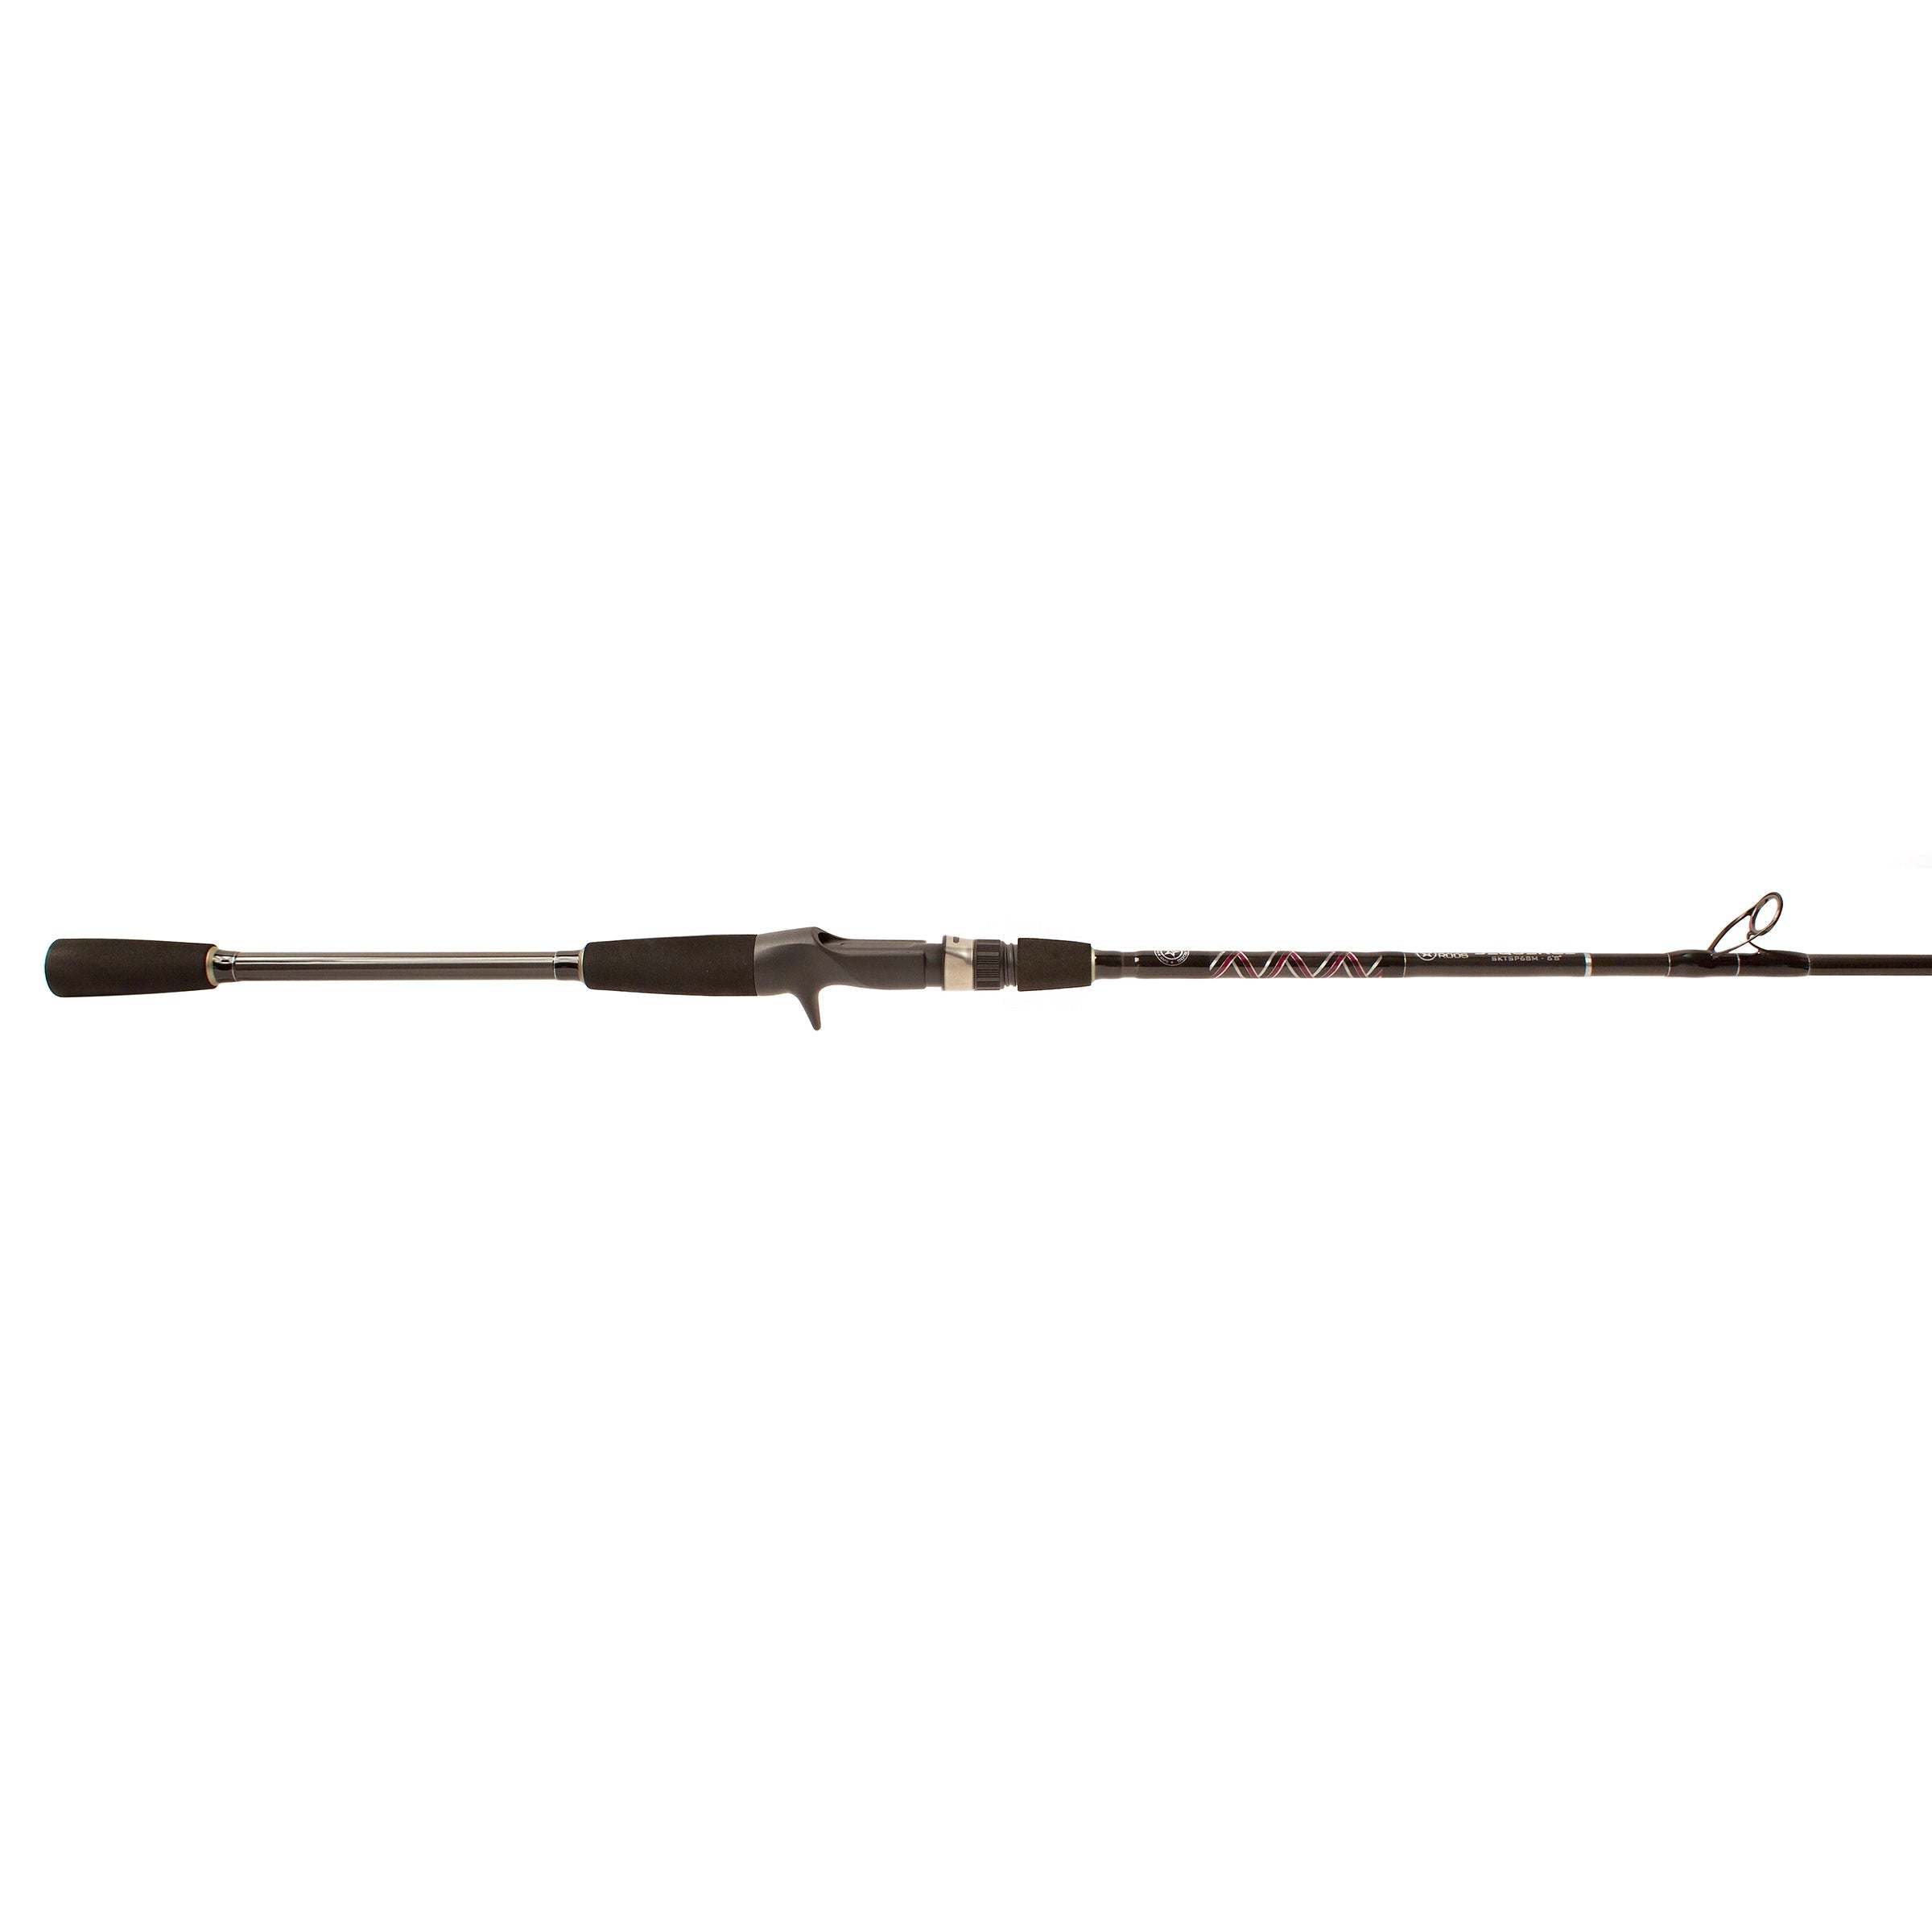 Sequence Slow Pitch Jigging Rods | Star Rods 6'8 / Medium